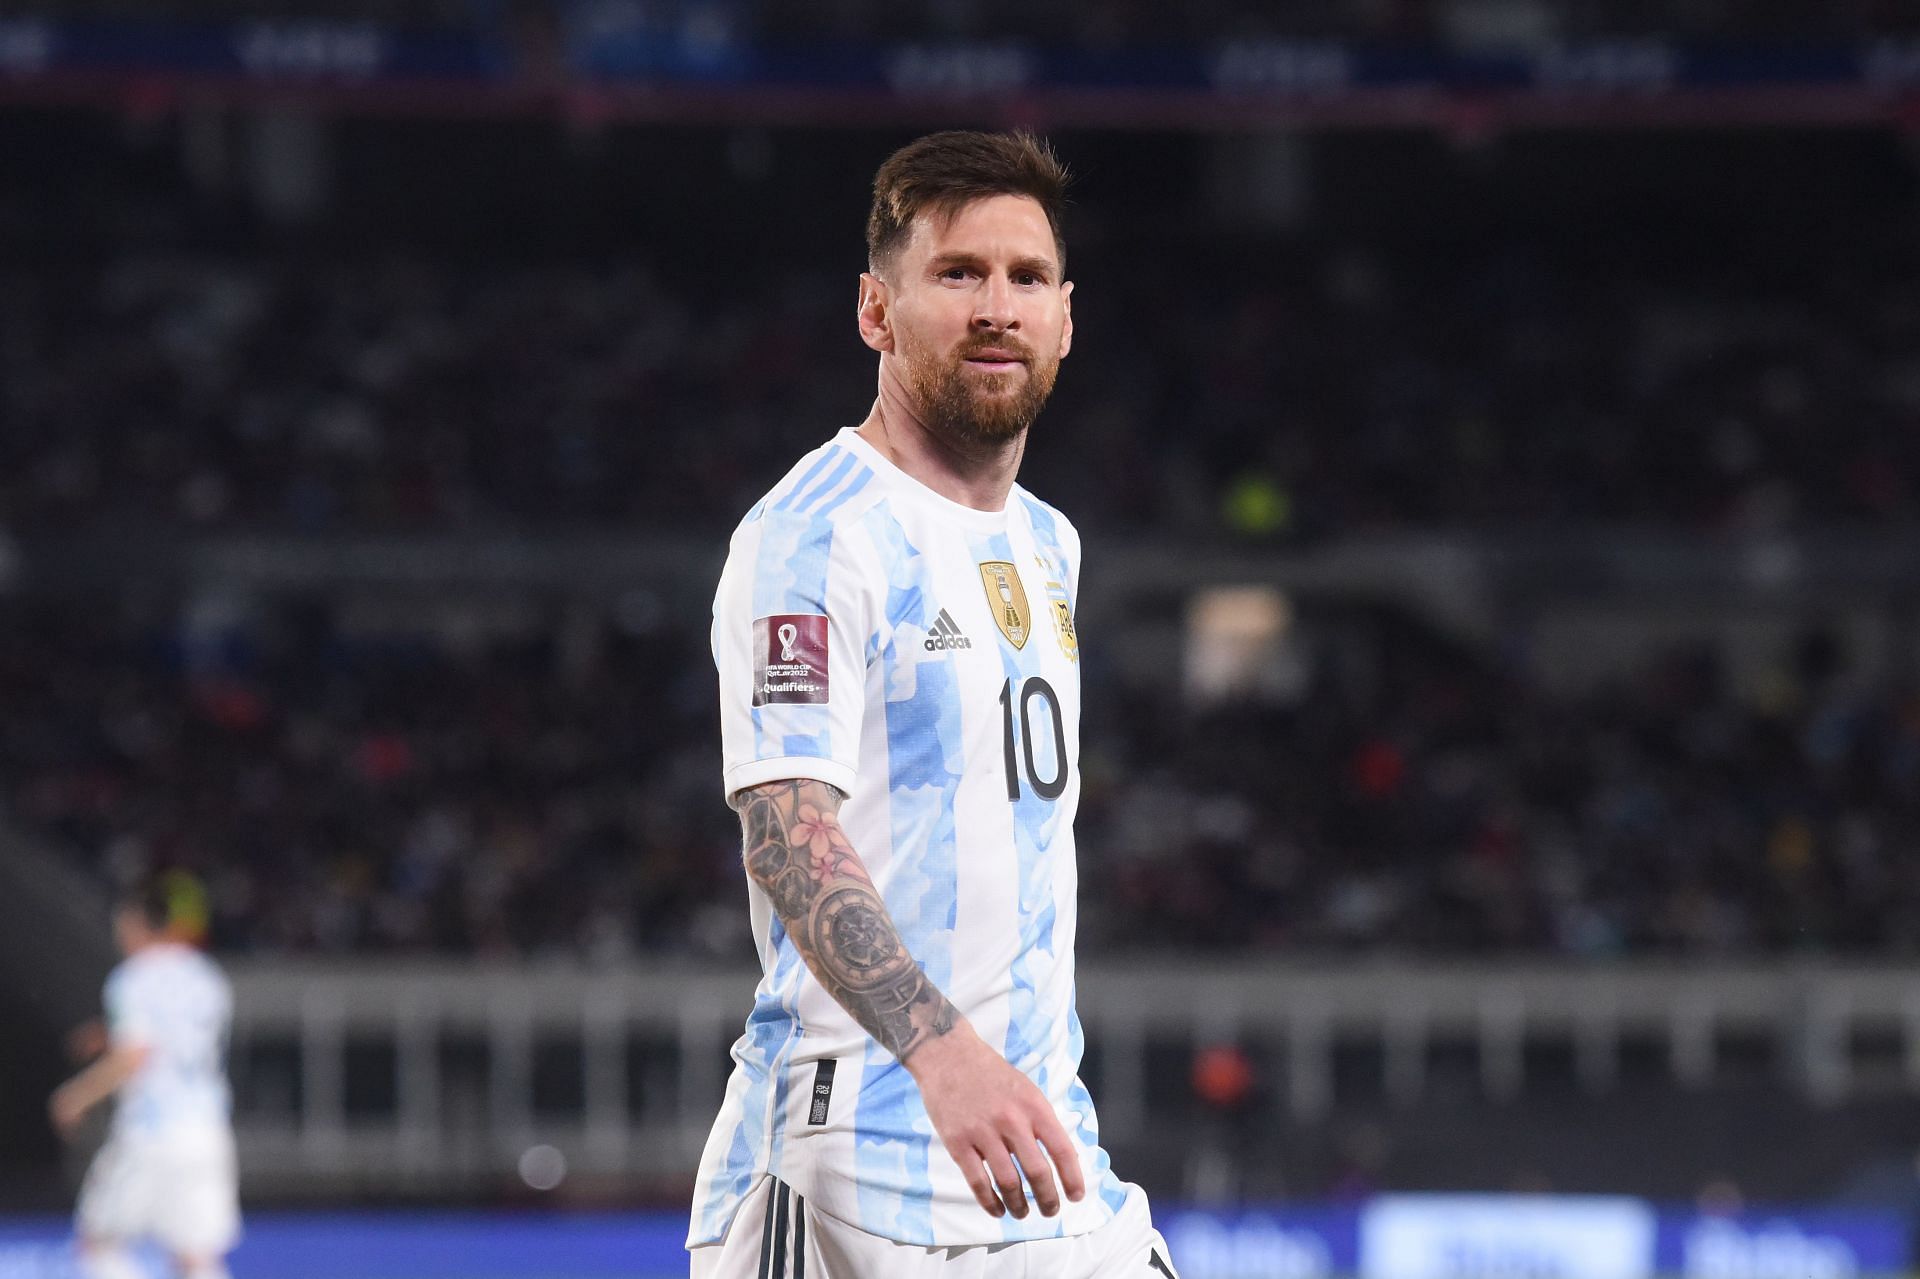 Argentina will have their captain back in action.